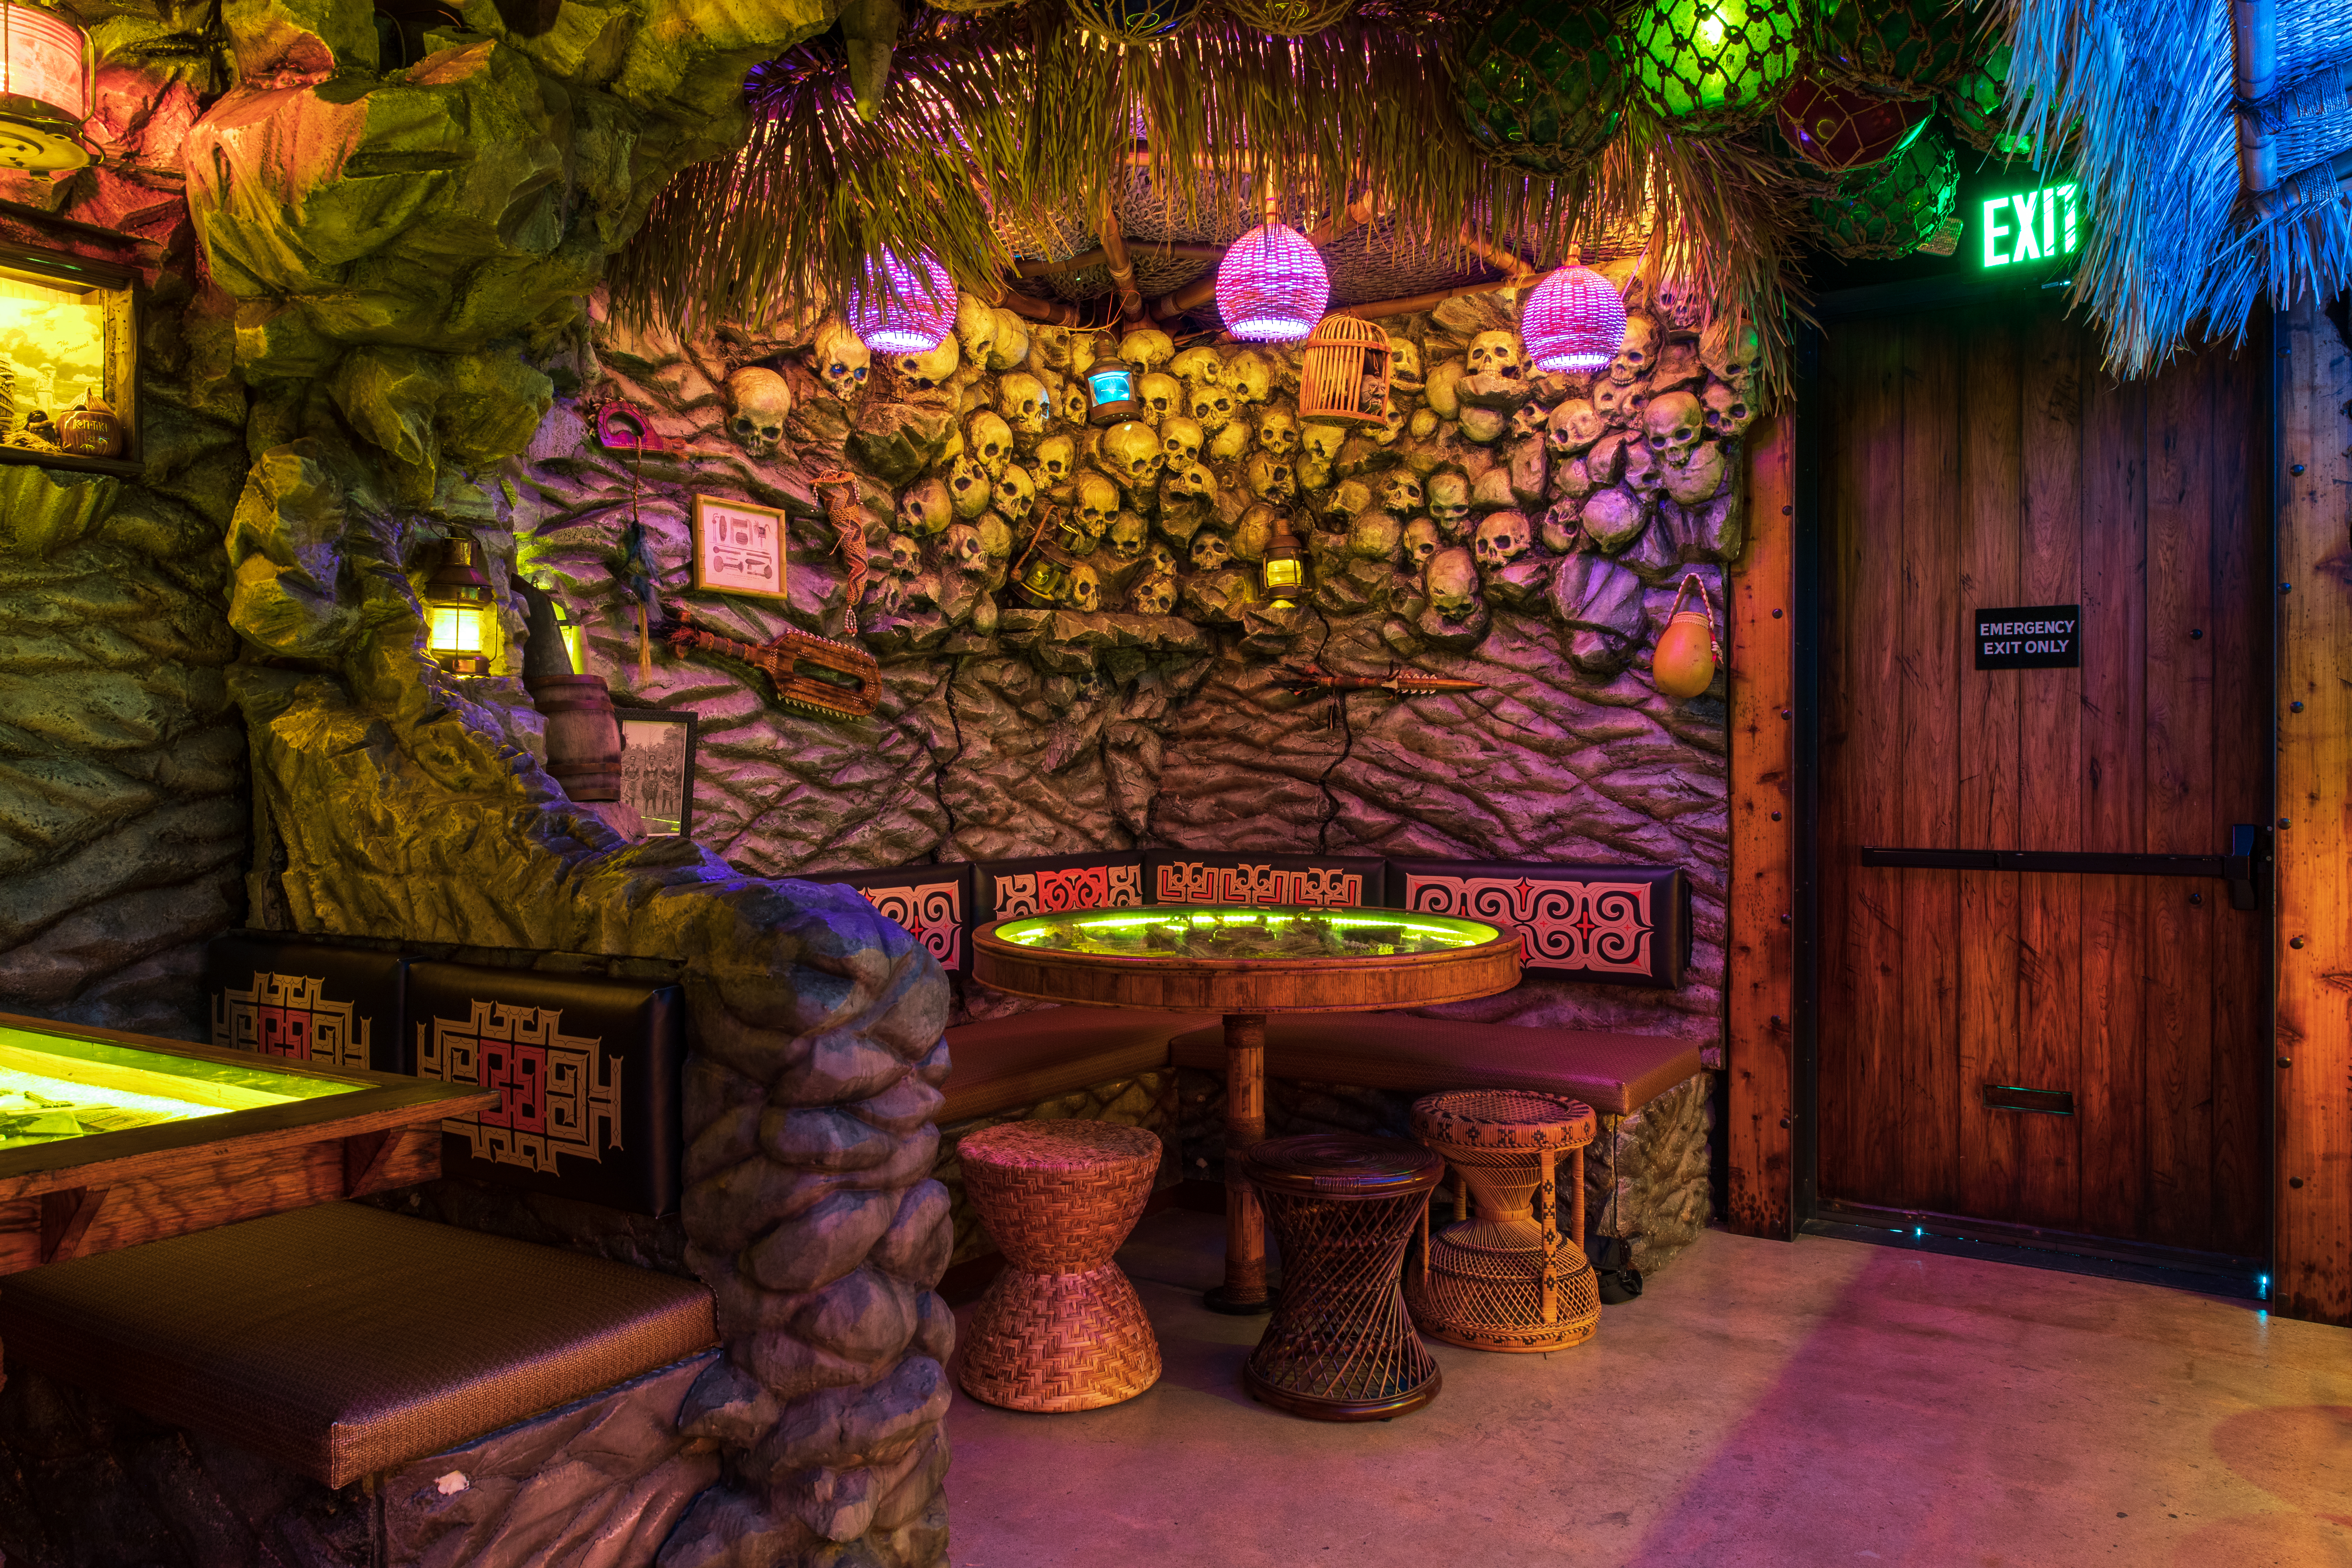 Under colorful lamps, fronds, and netting, a corner booth is nestled into a rock wall inlaid with skulls.